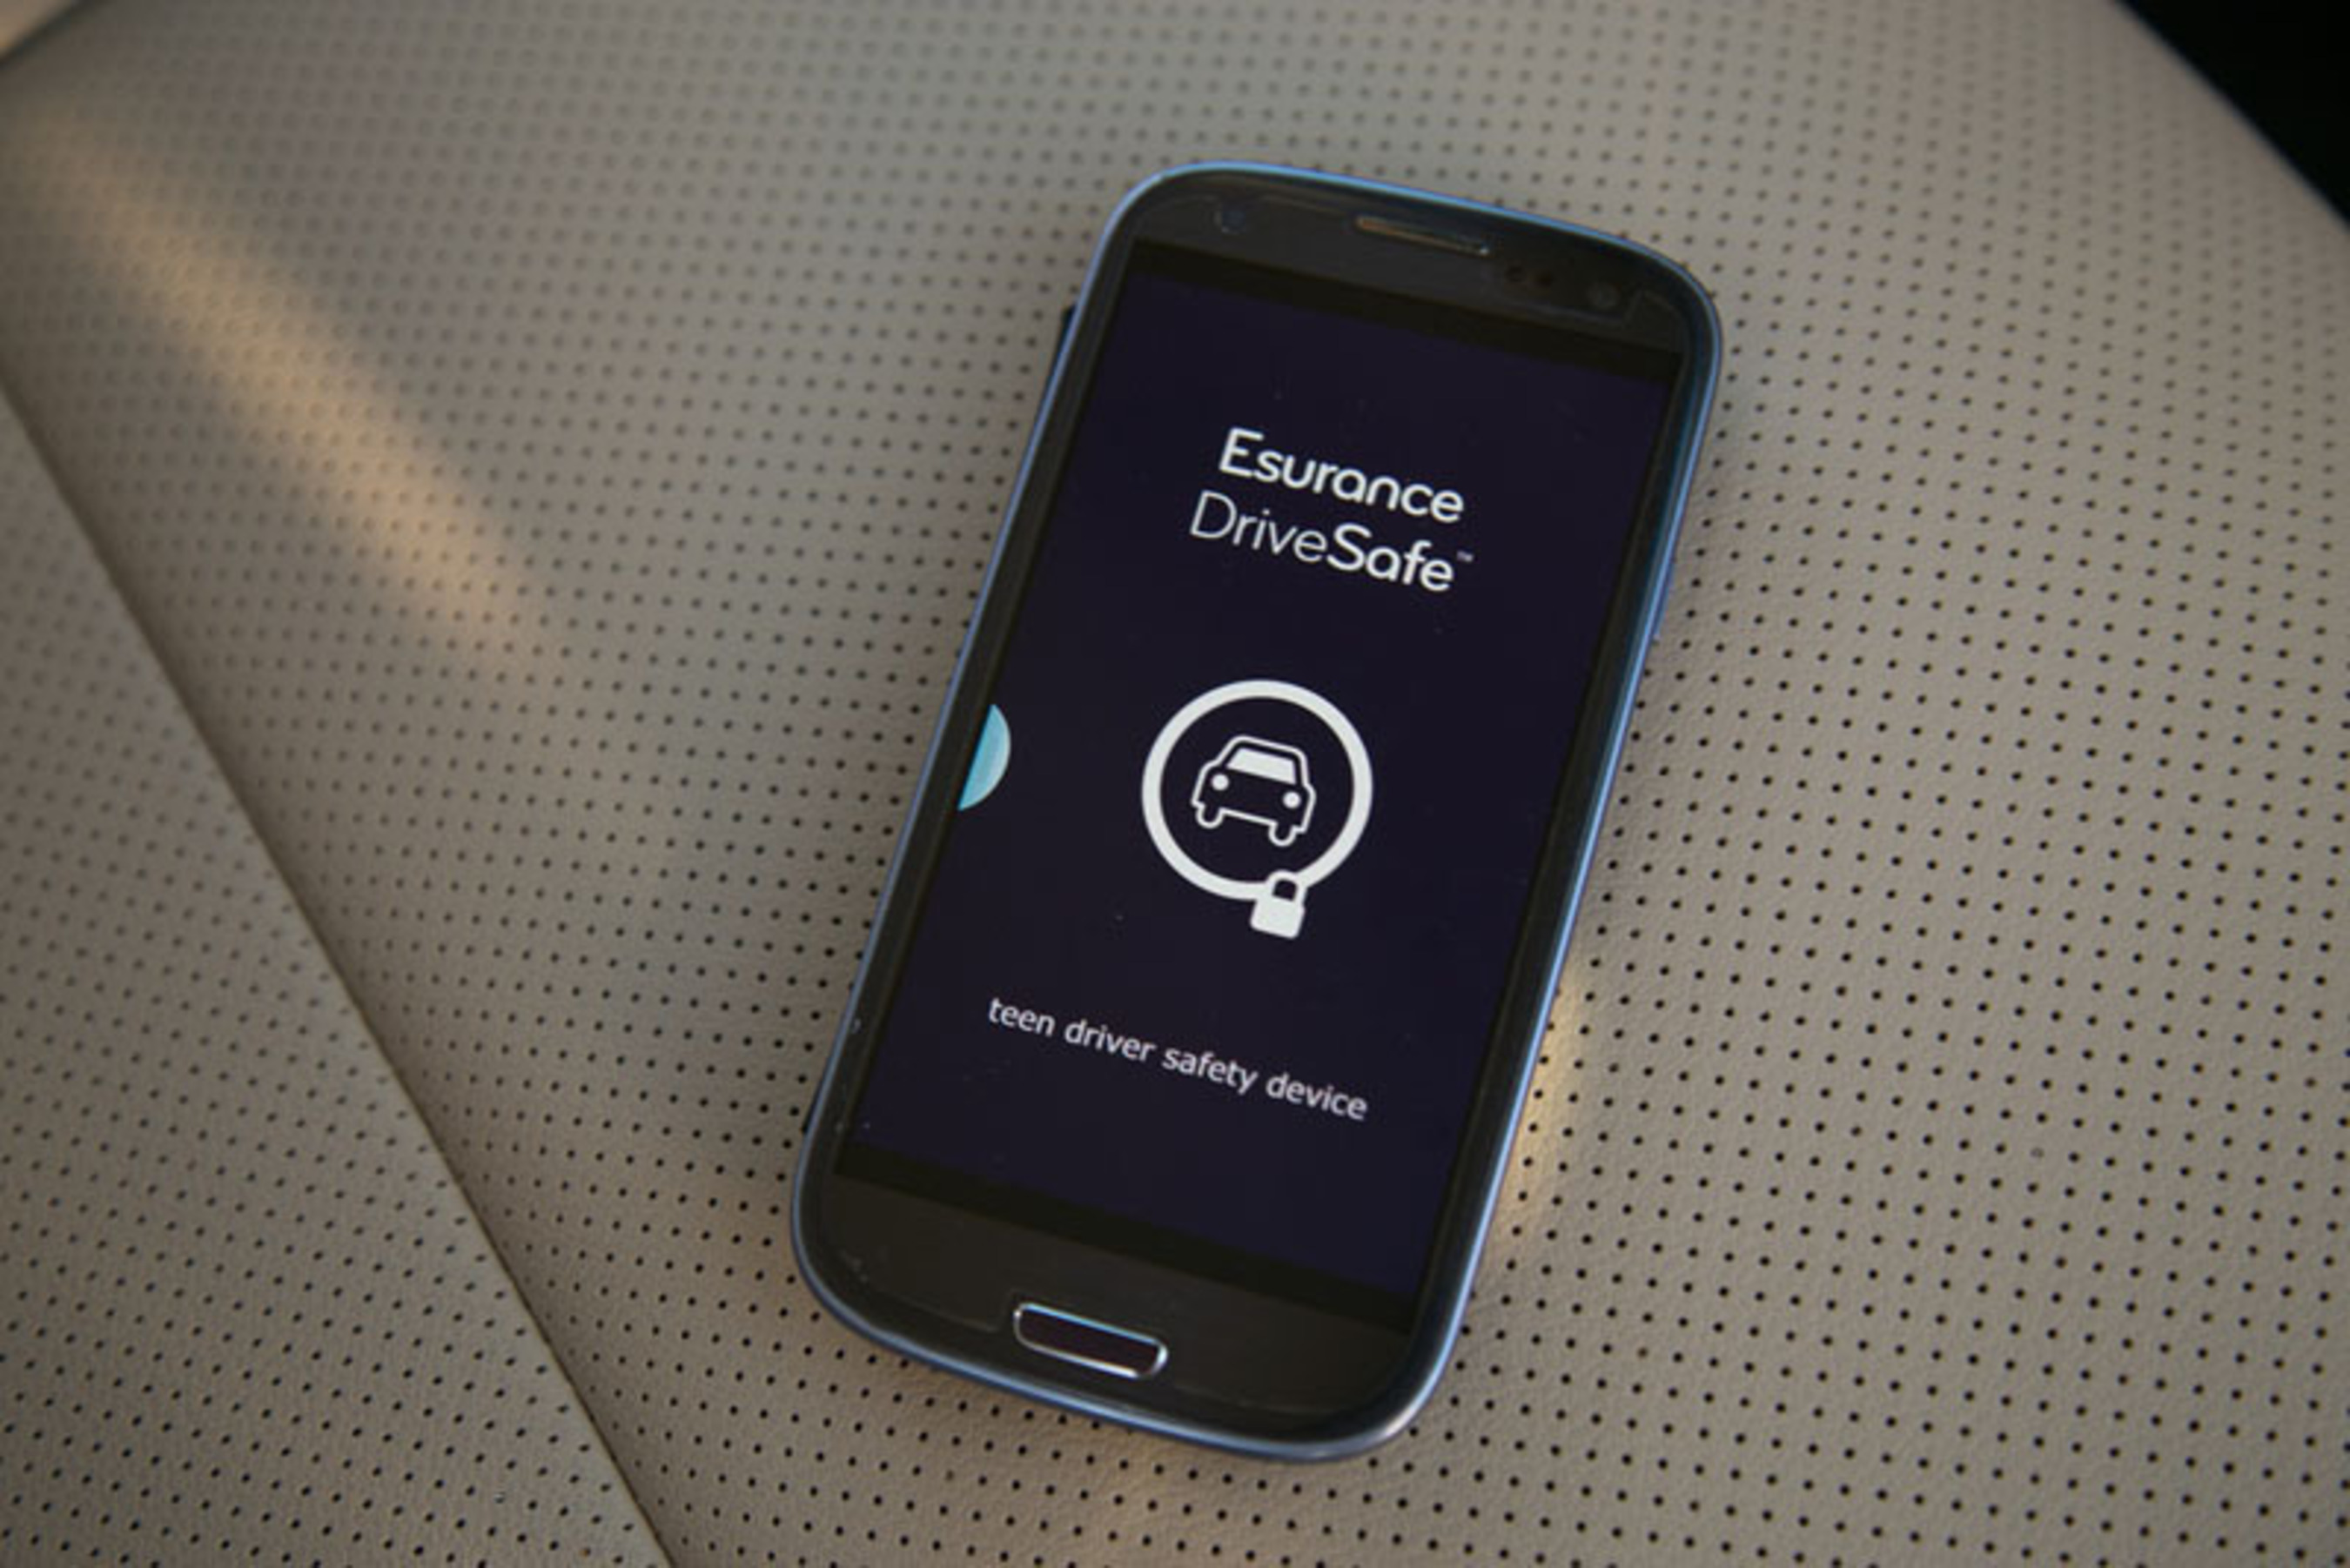 The Esurance DriveSafe program limits cellphone use while the car is in motion, preventing texting and driving and helping to keep teens focused on the road. (PRNewsFoto/Esurance) (PRNewsFoto/ESURANCE)